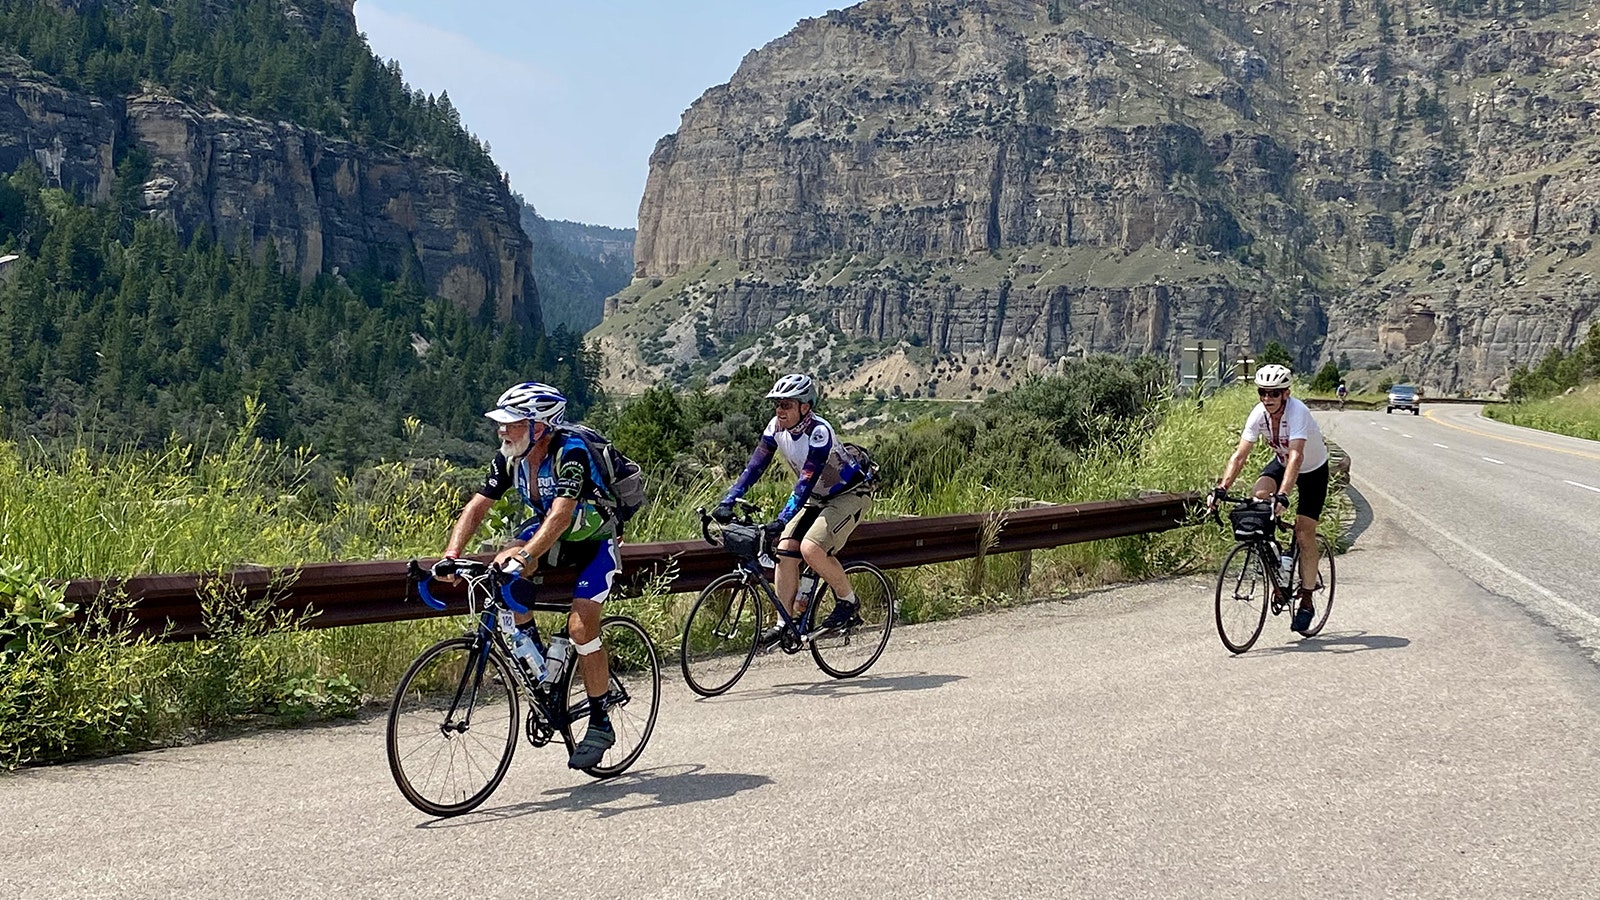 Riders in the Tour de Wyoming work their way up Ten Sleep Canyon this week.